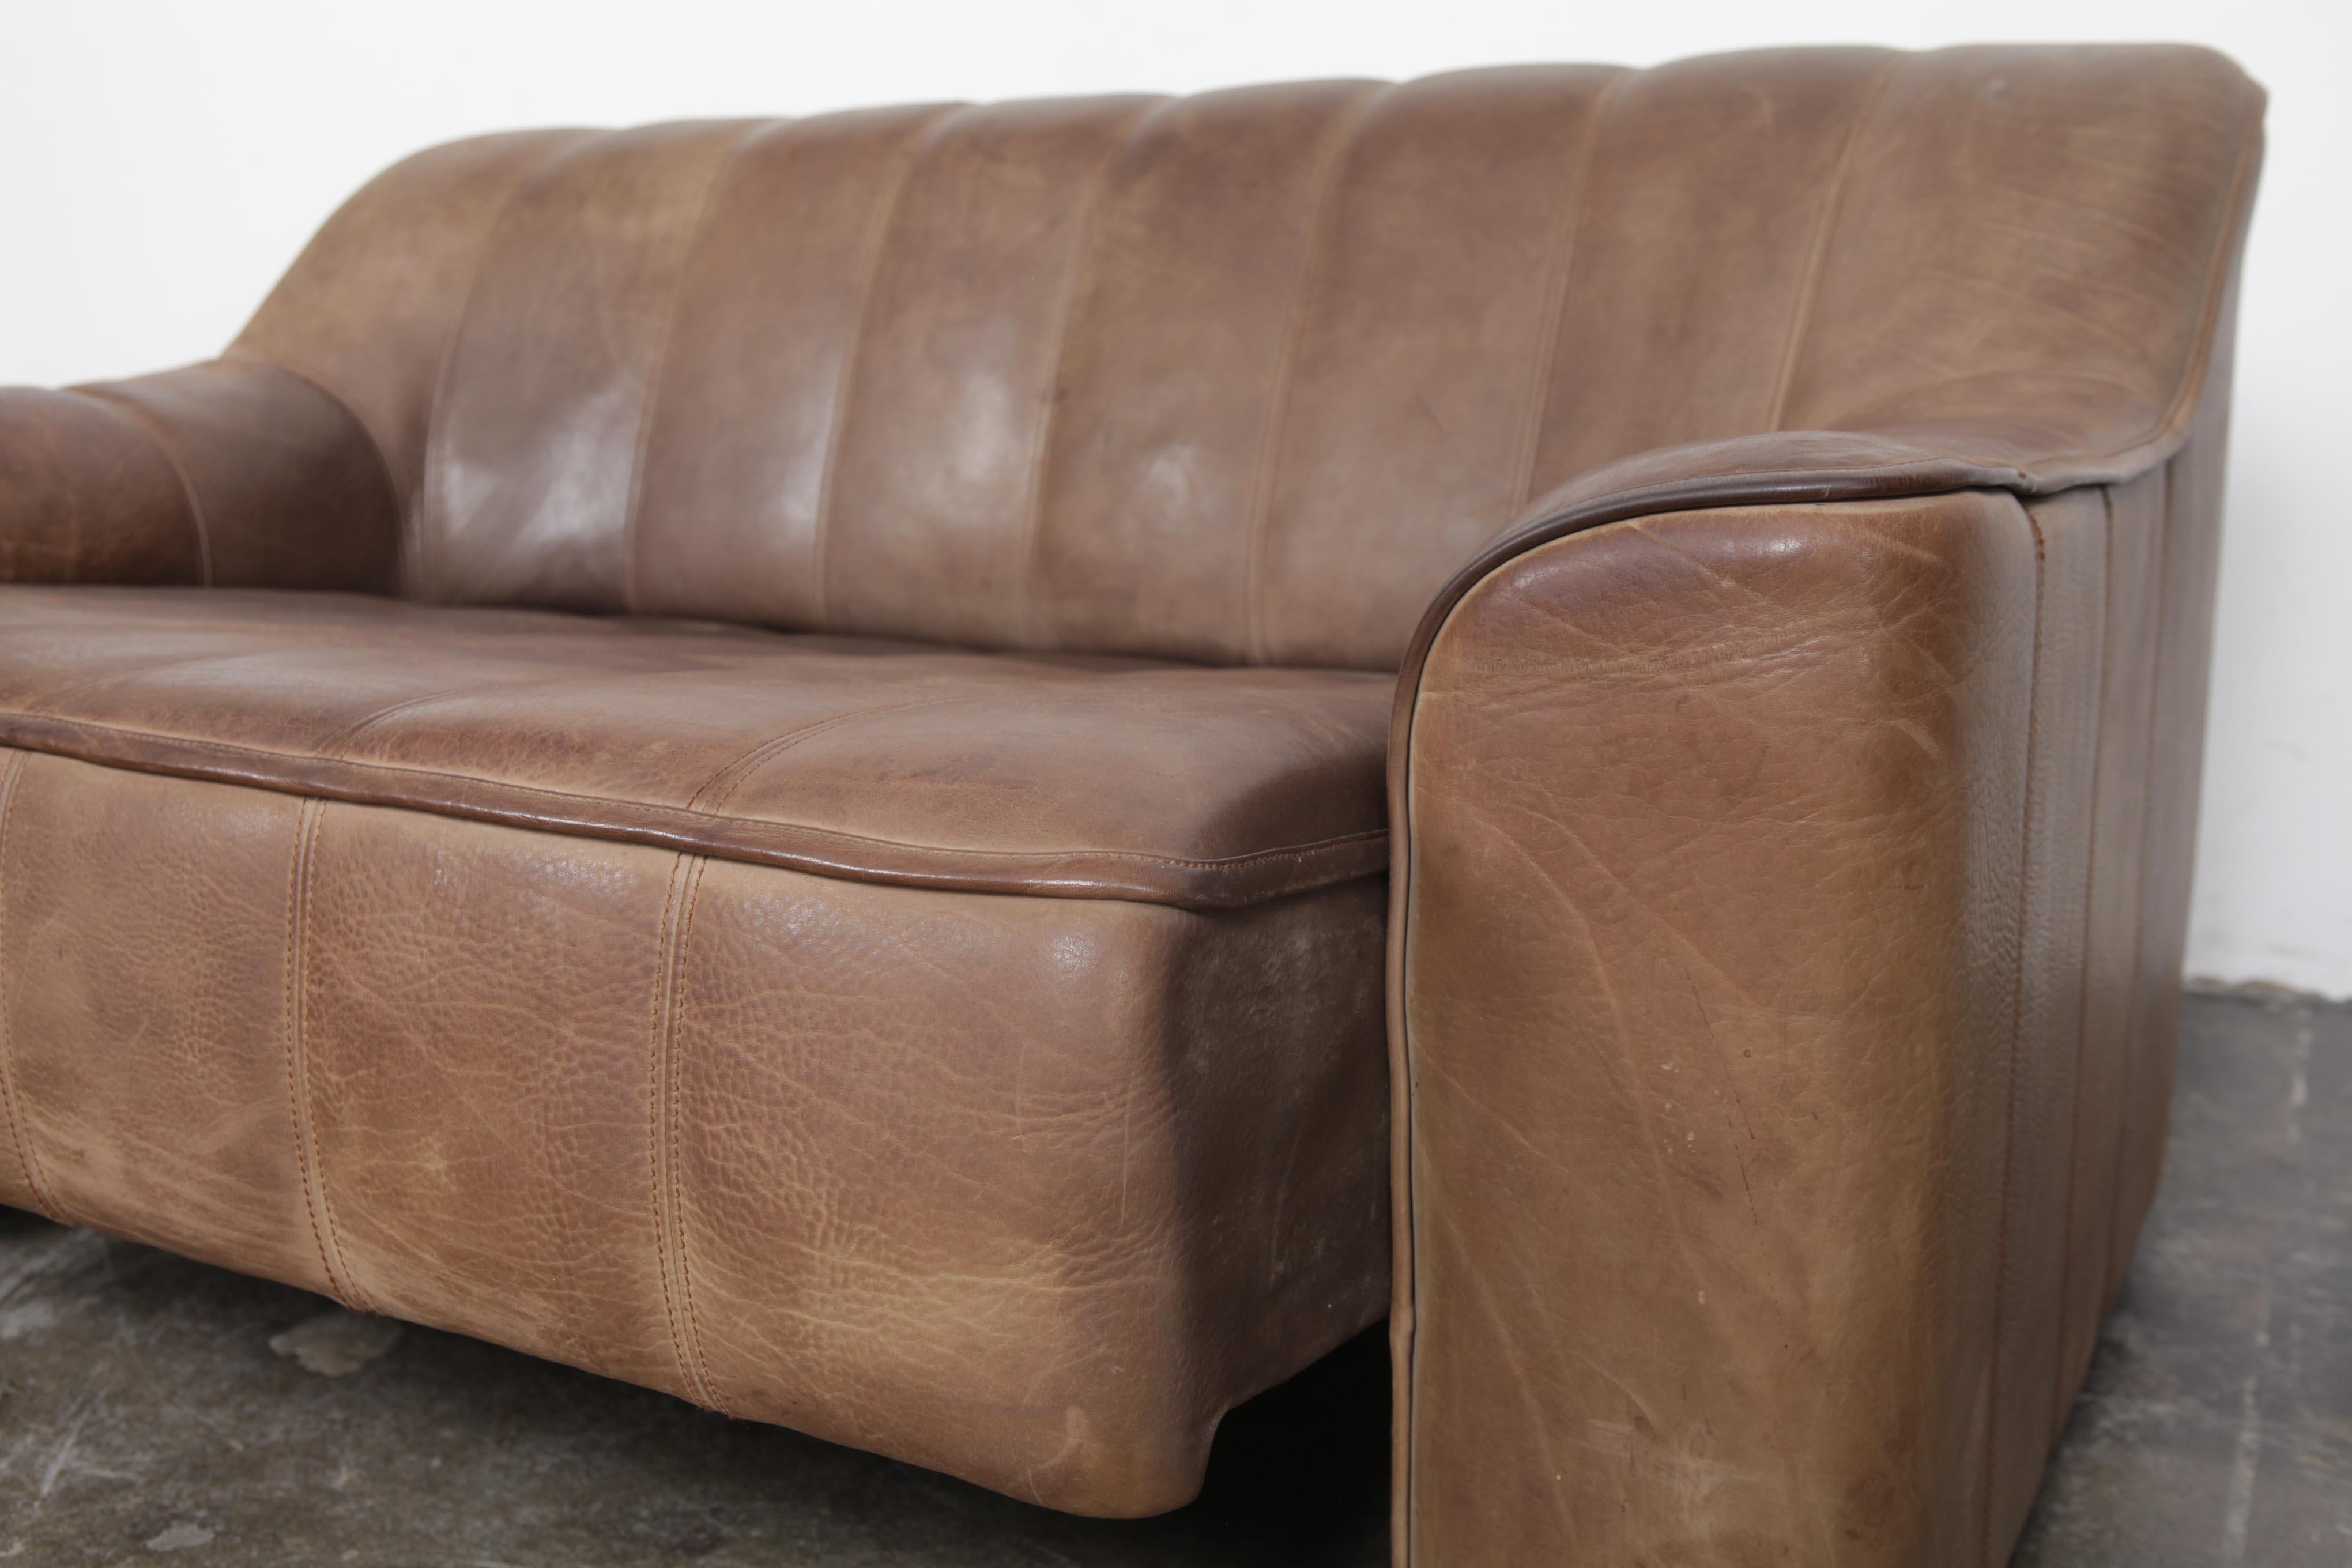 De Sede DS 44 2-Seat Sofa in Buffalo Leather, Switzerland, 1970s For Sale 2